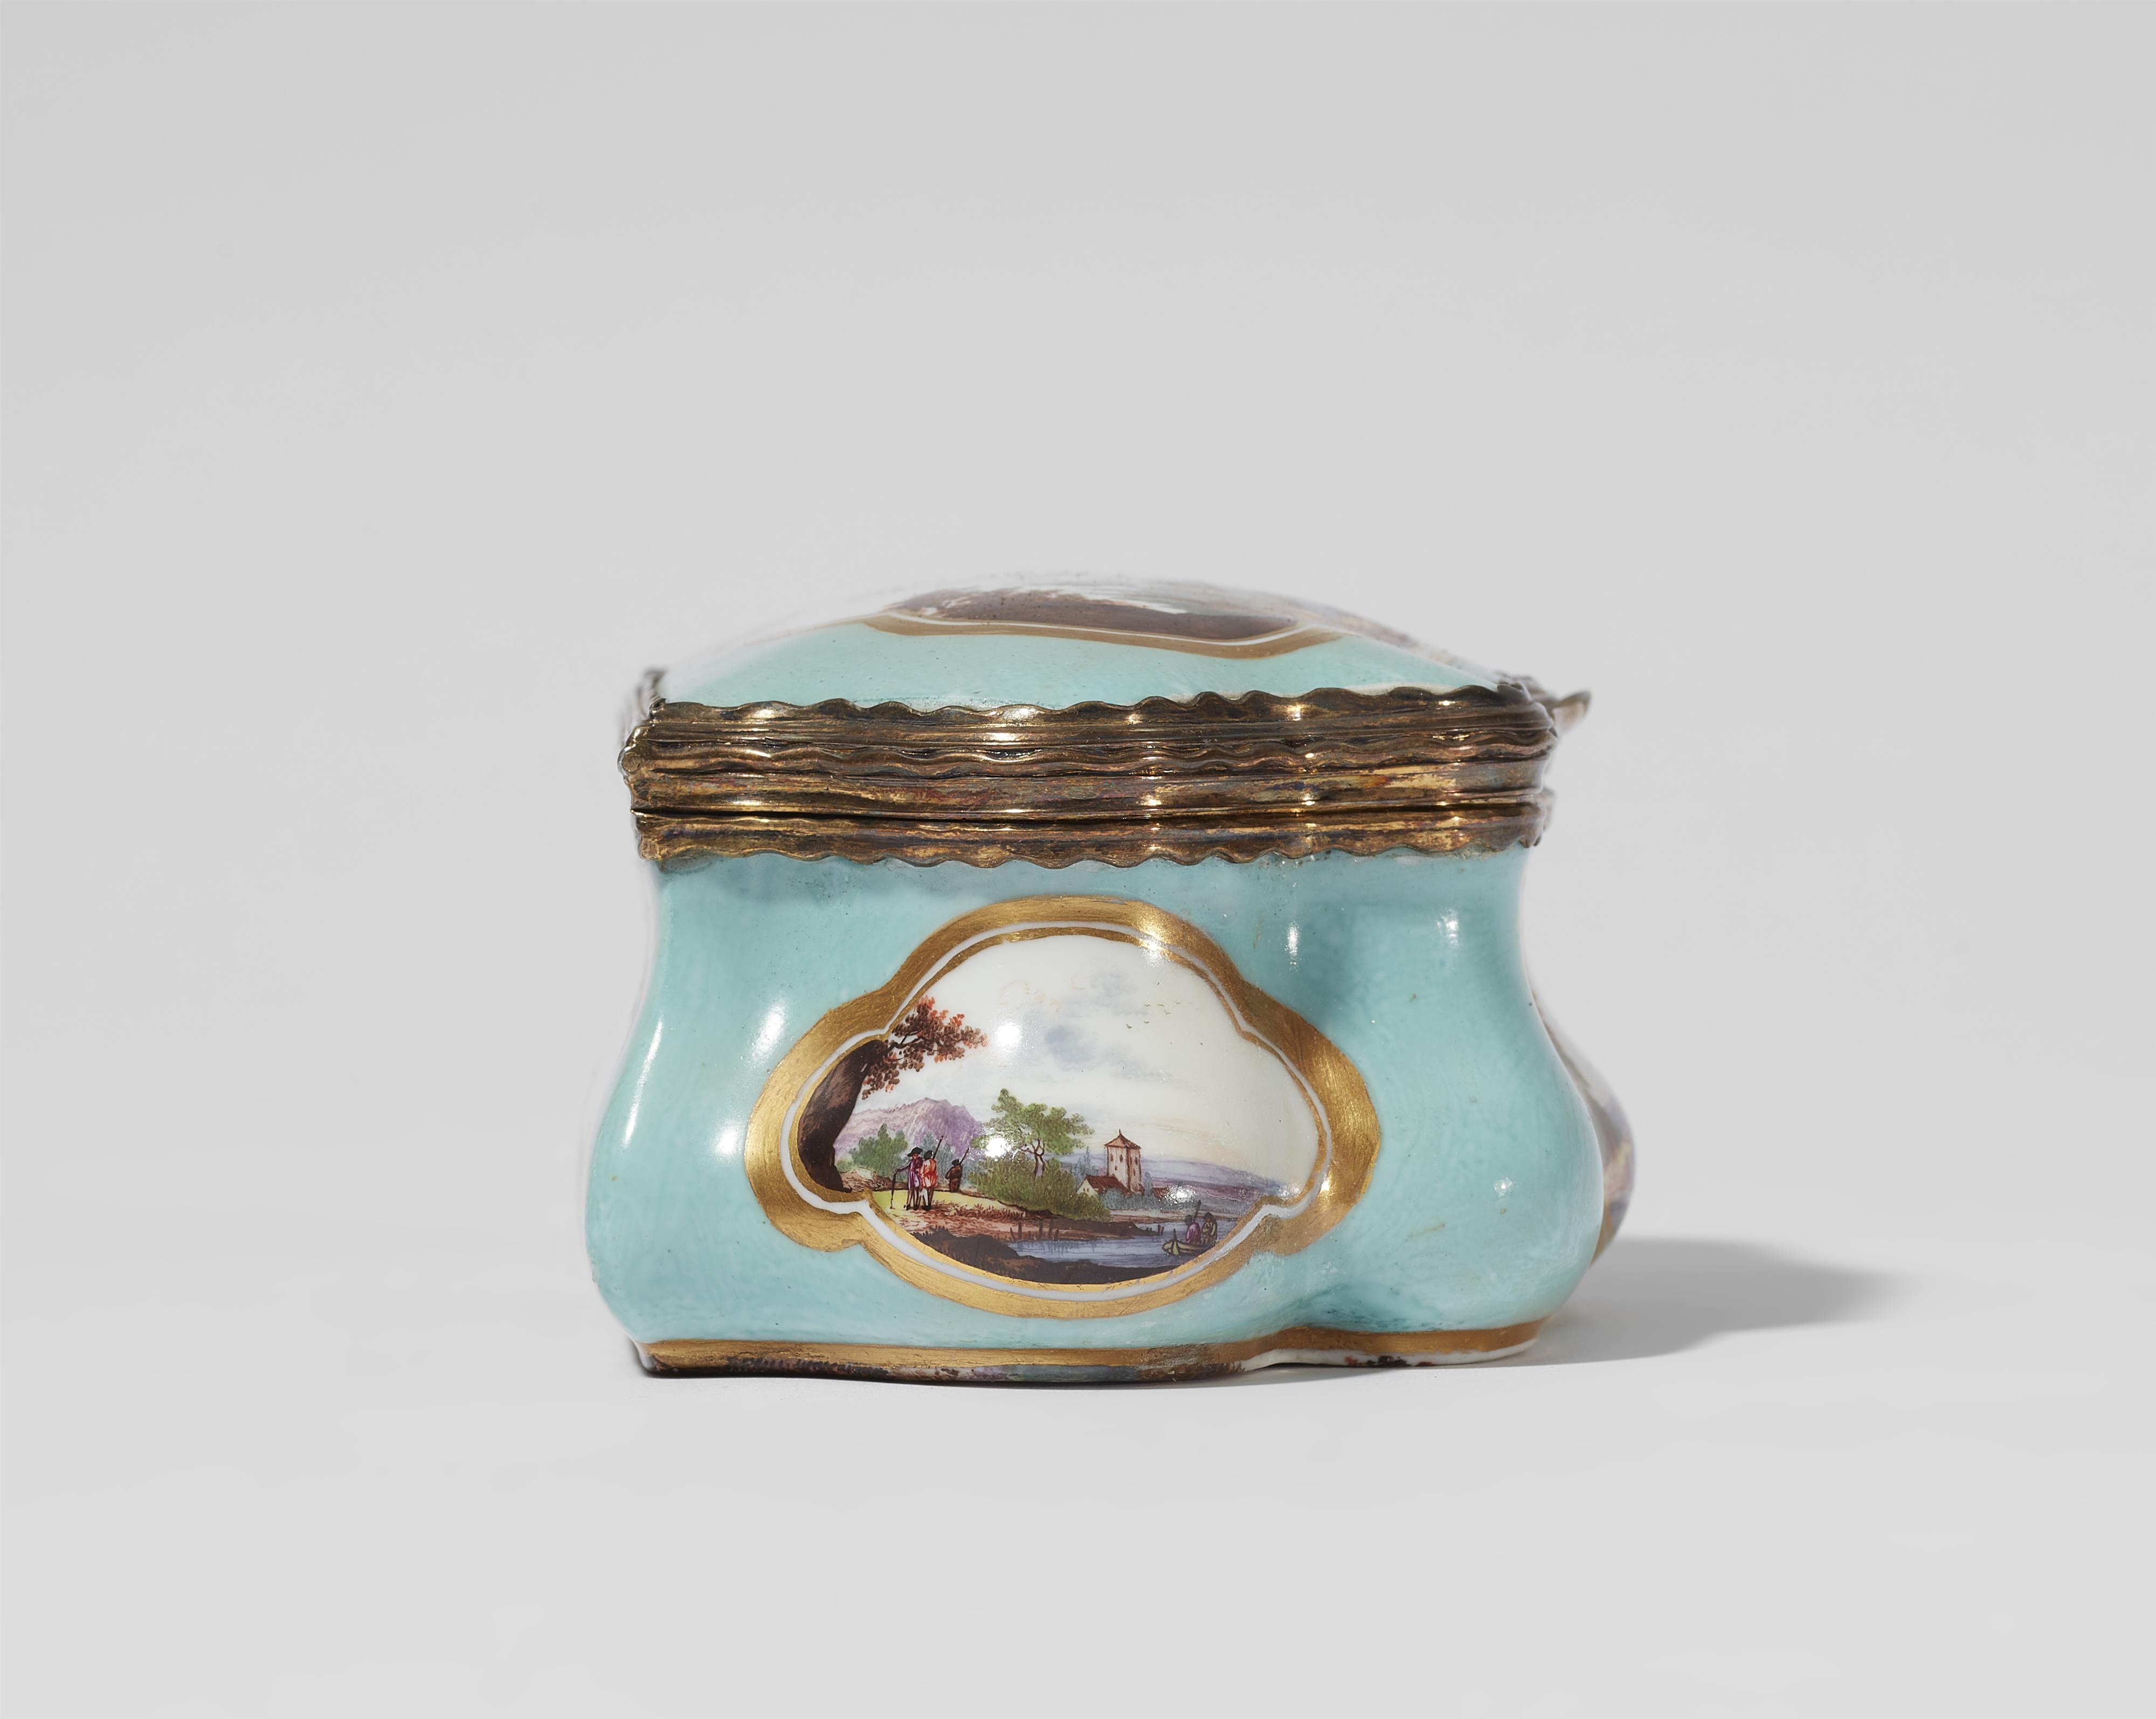 An important Meissen porcelain snuff box with water landscapes and a genre scene - image-6